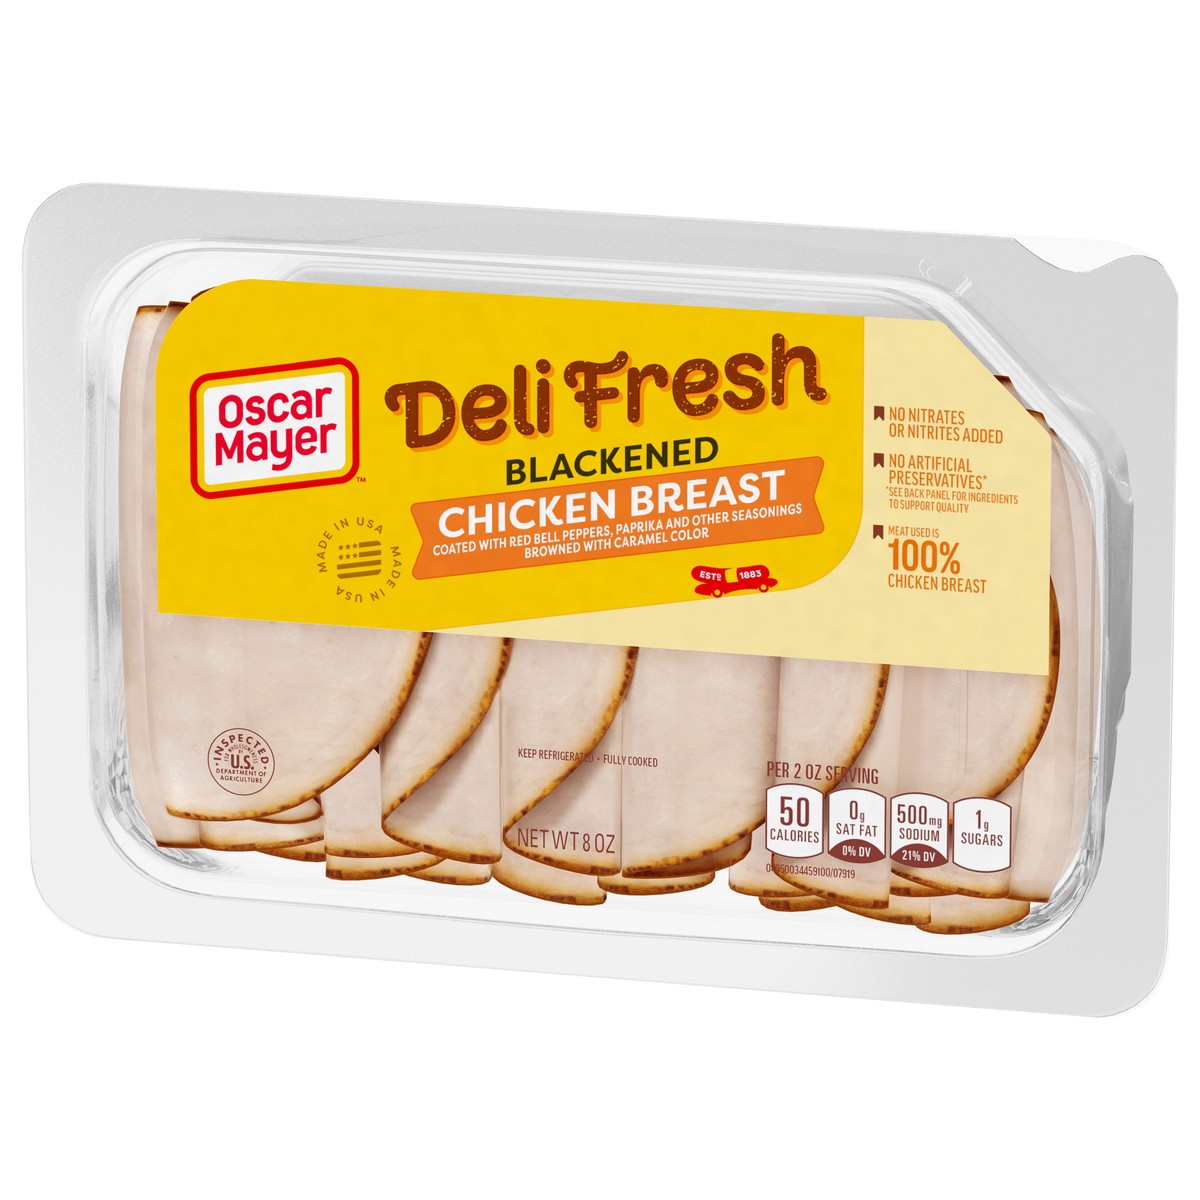 slide 6 of 9, Oscar Mayer Deli Fresh Blackened Chicken Breast Coated with Red Bell Pepper, Paprika and other Seasonings Browned with Caramel Color Sliced Lunch Meat, 8 oz. Tray, 8 oz